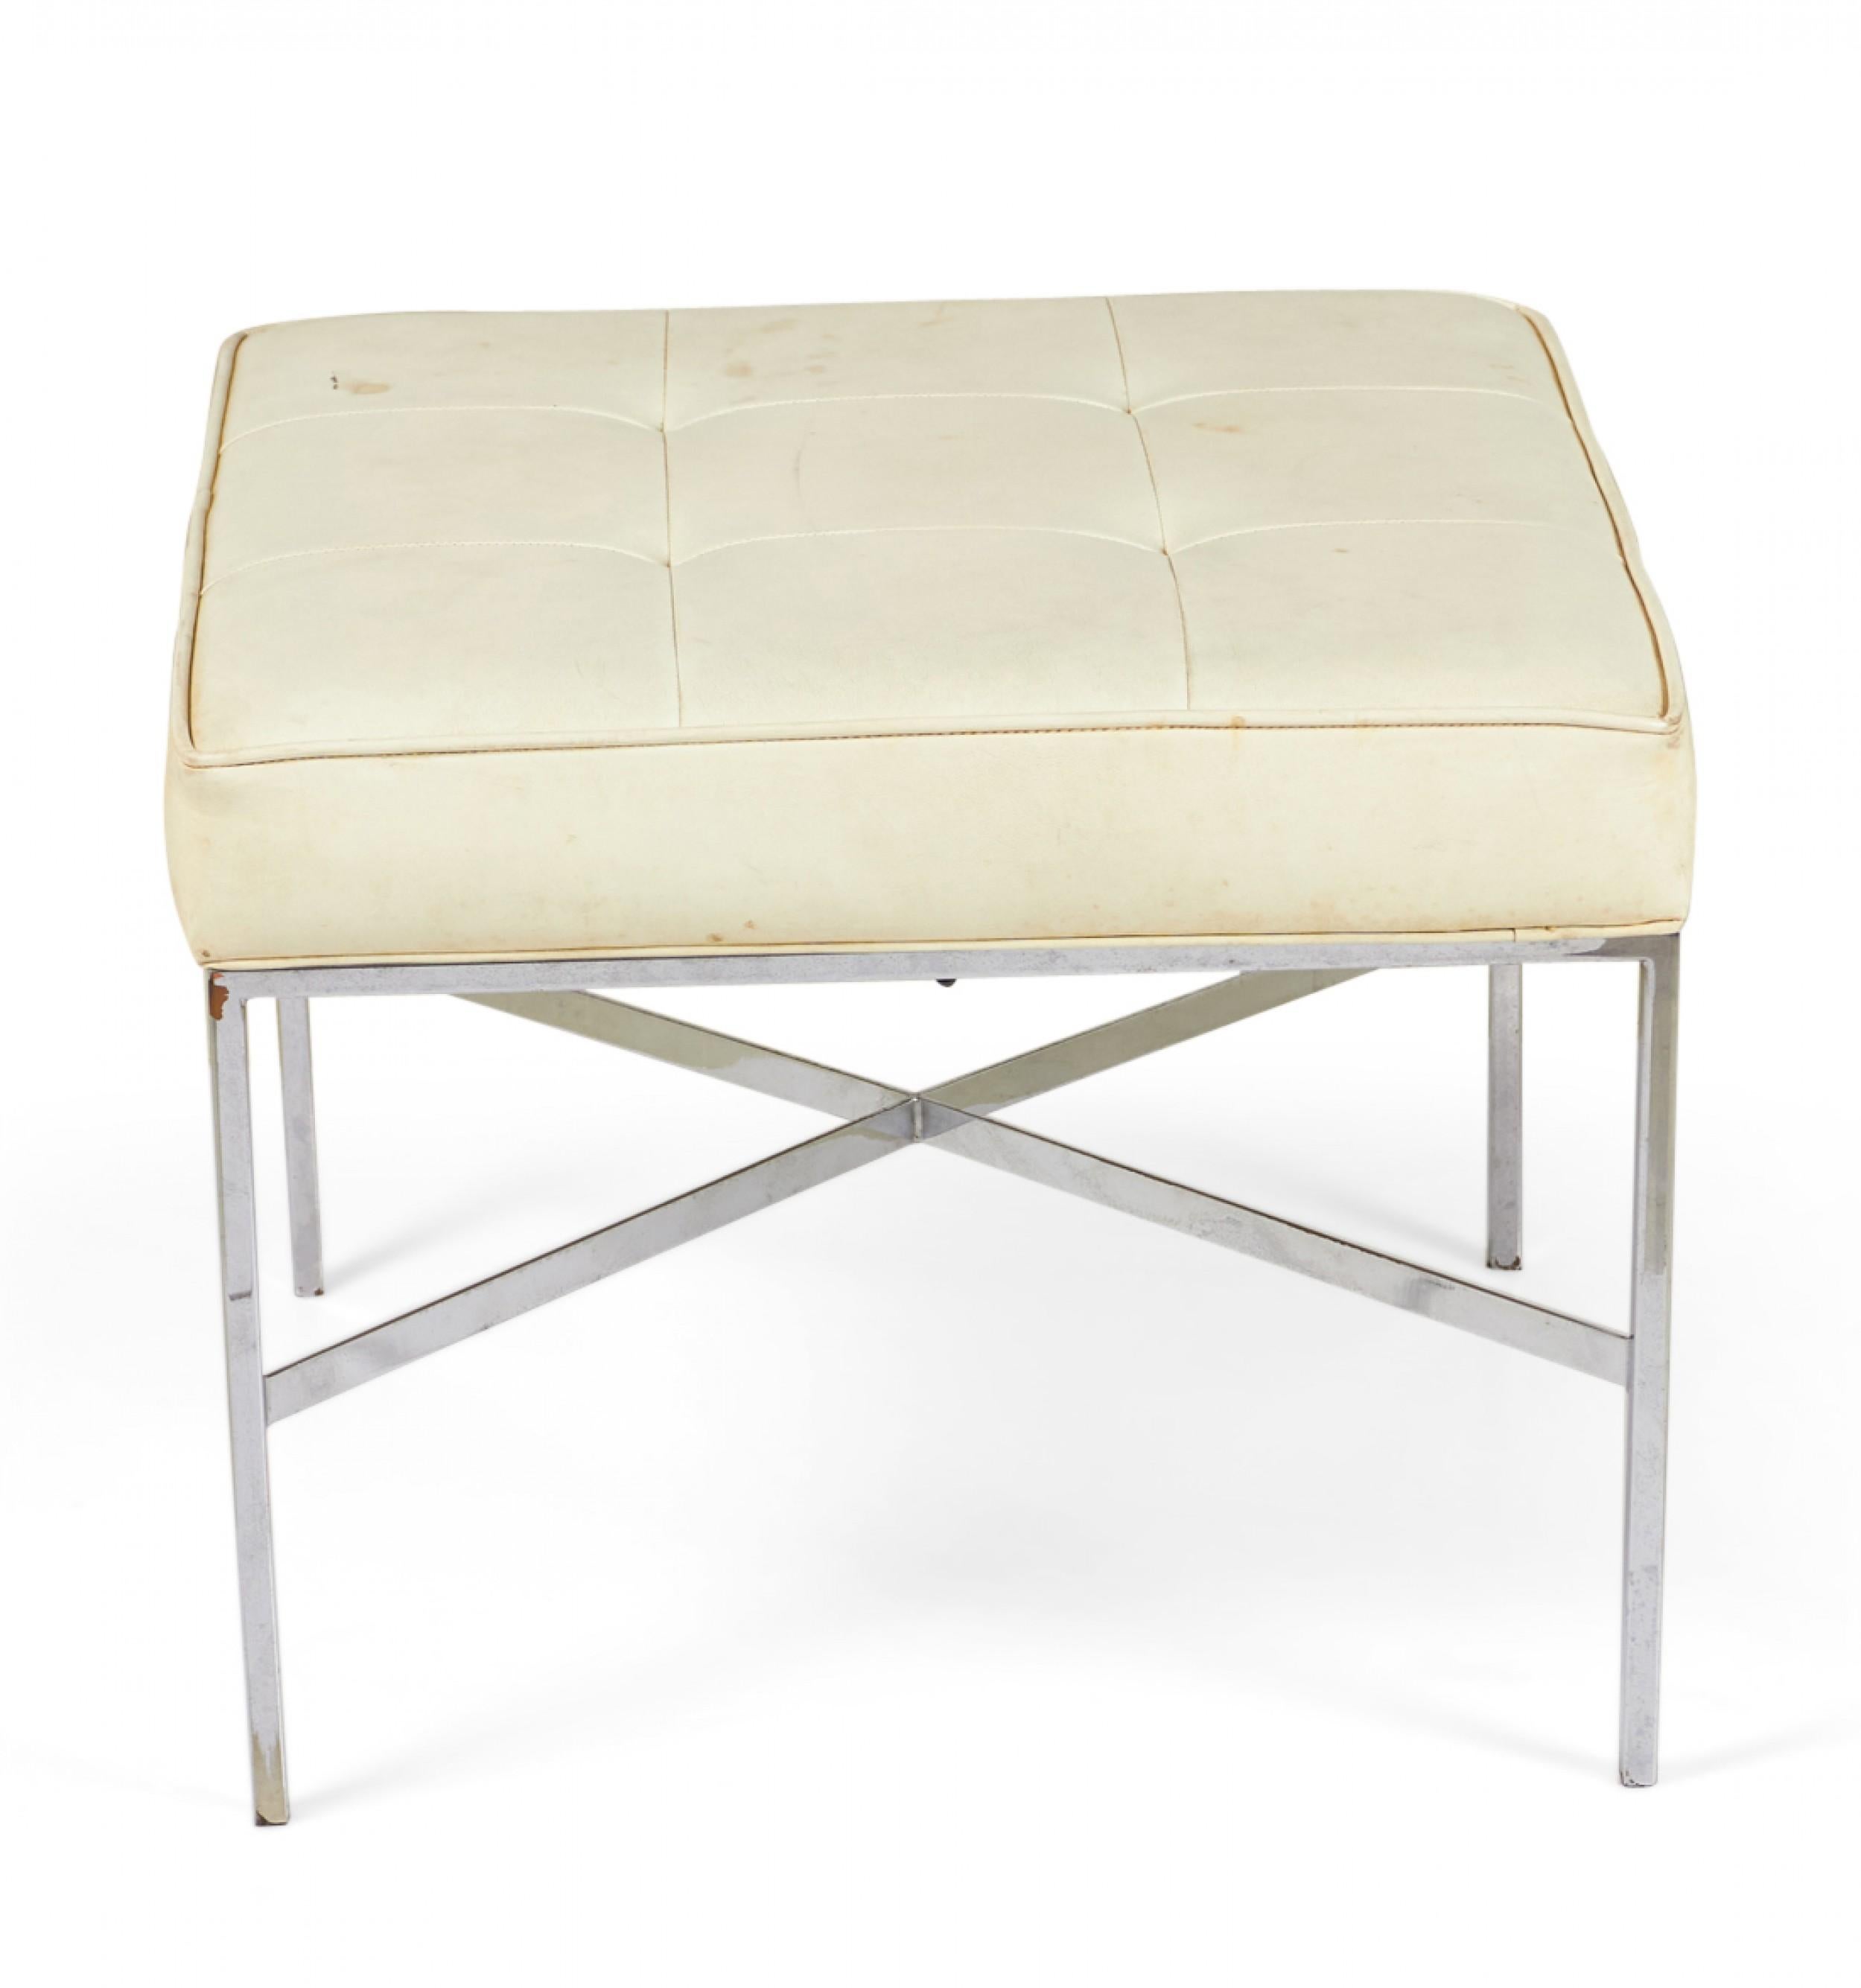 Design Institute of Chrome and Button Tufted White Vinyl Square Bench In Good Condition For Sale In New York, NY